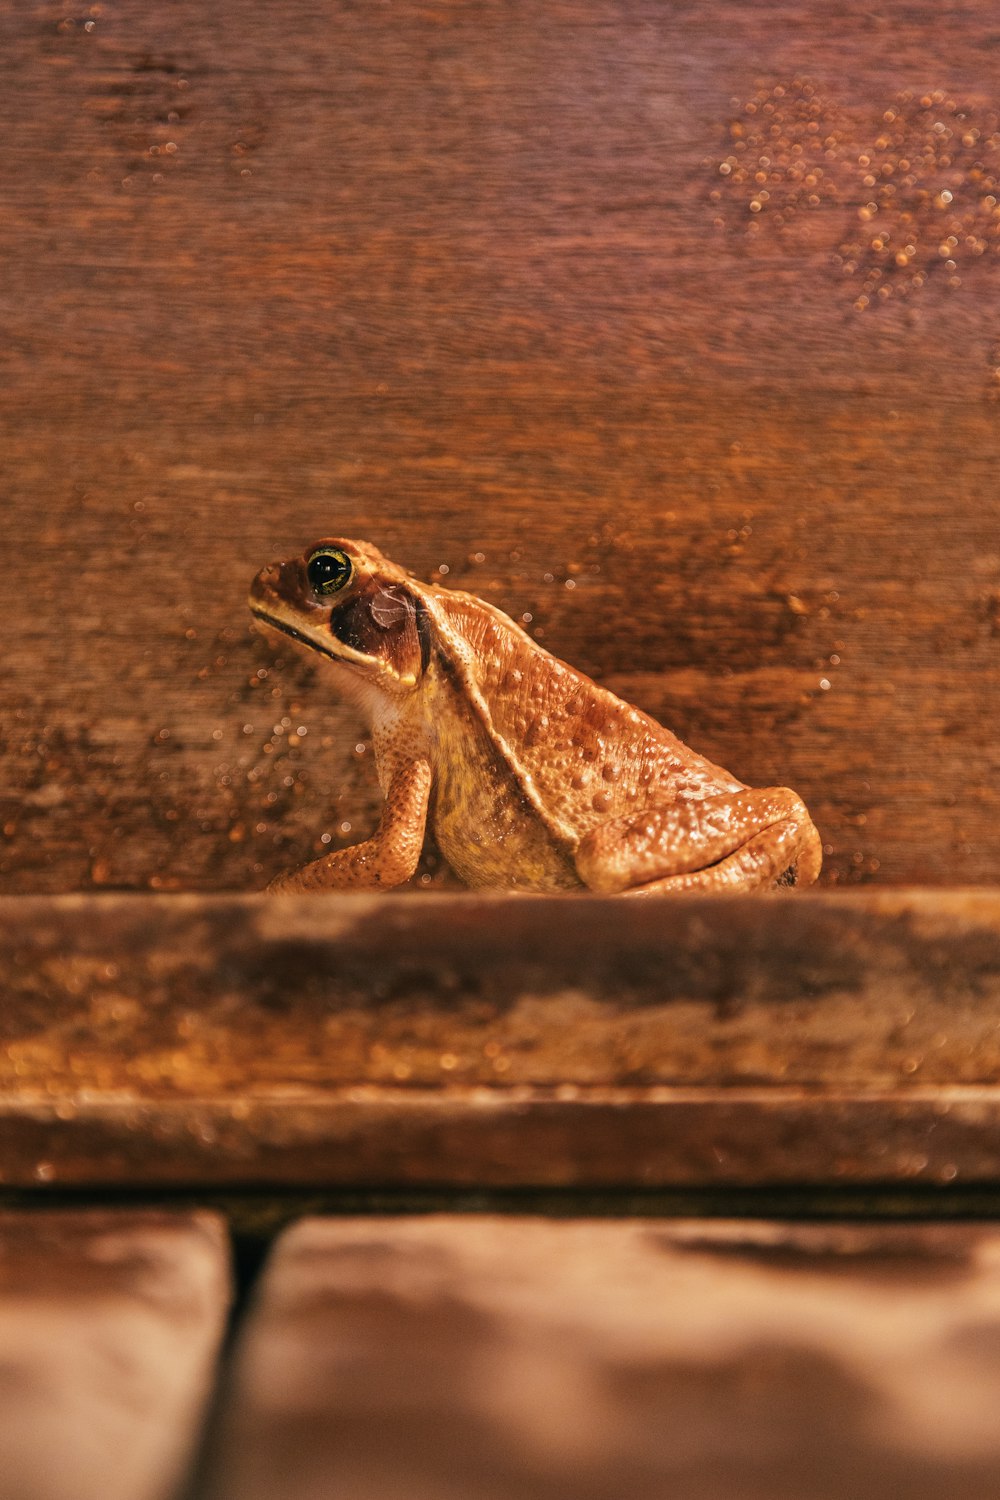 a frog on a wood surface